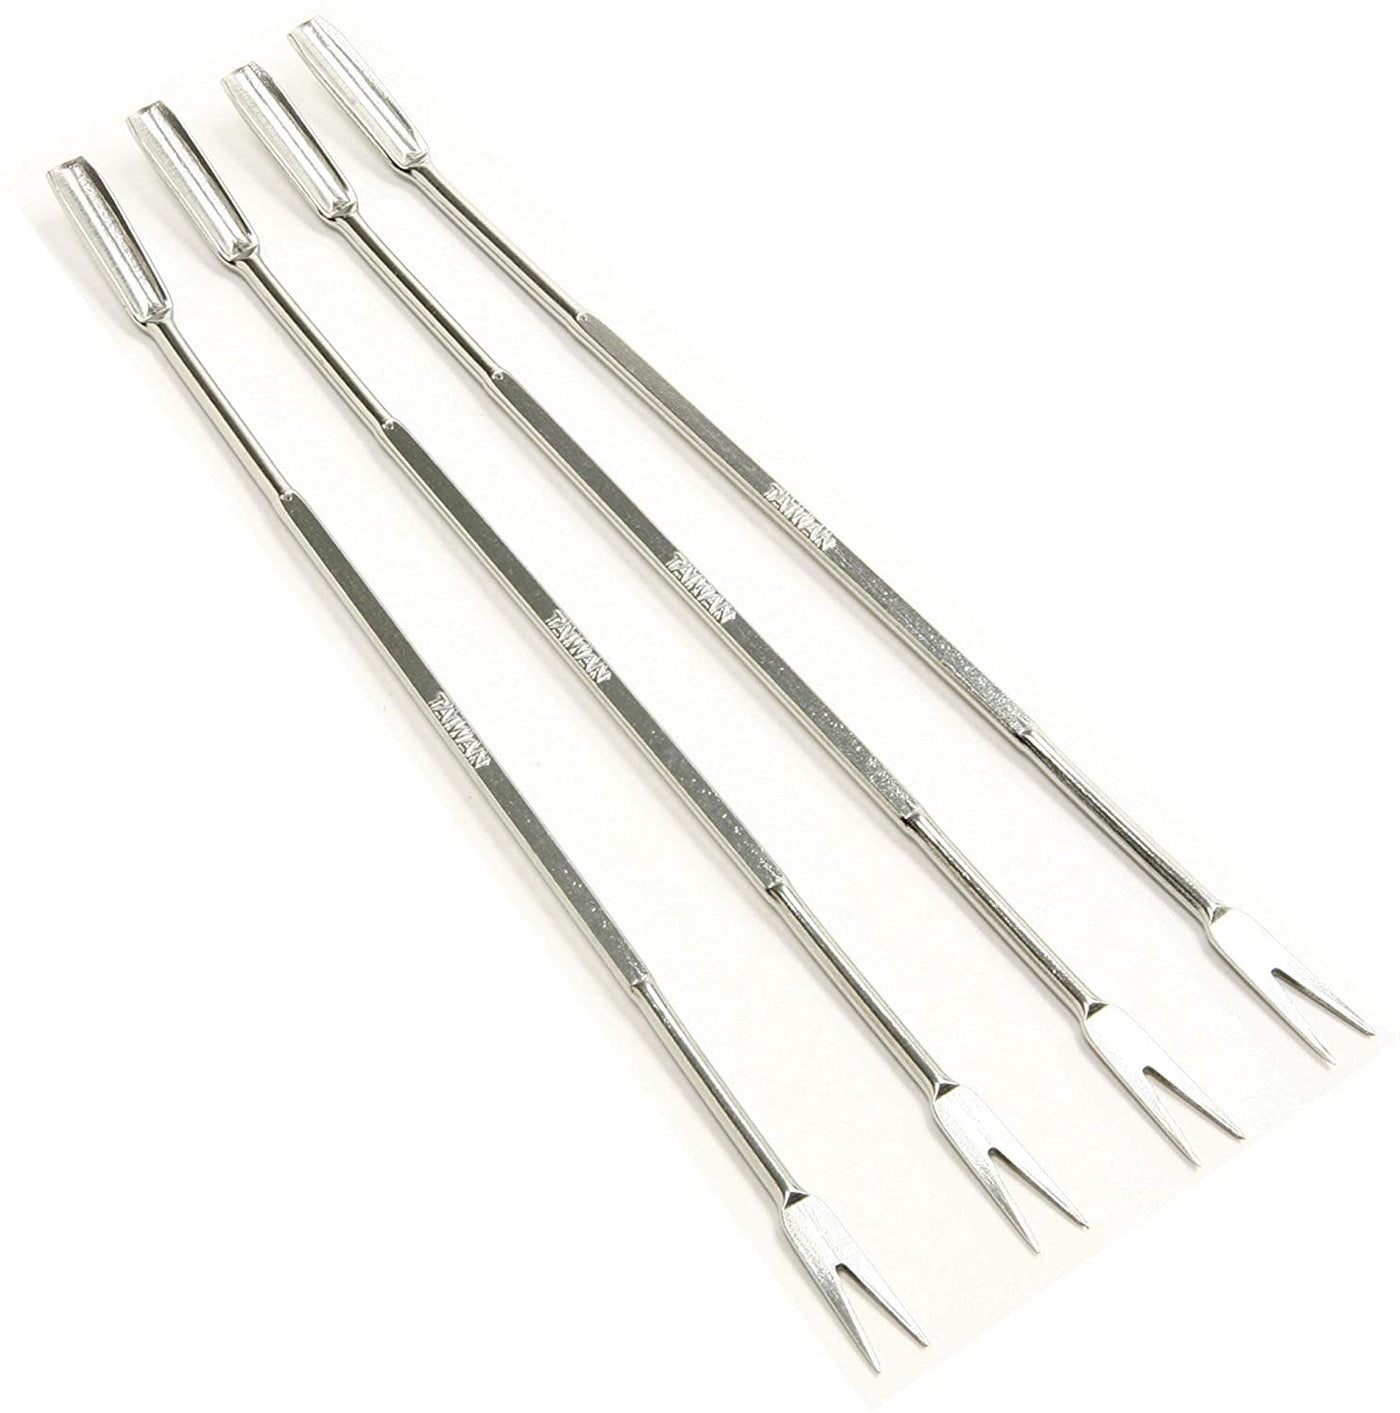 Norpro 4pc Stainless Steel Seafood Forks - Crab Lobster Shellfish